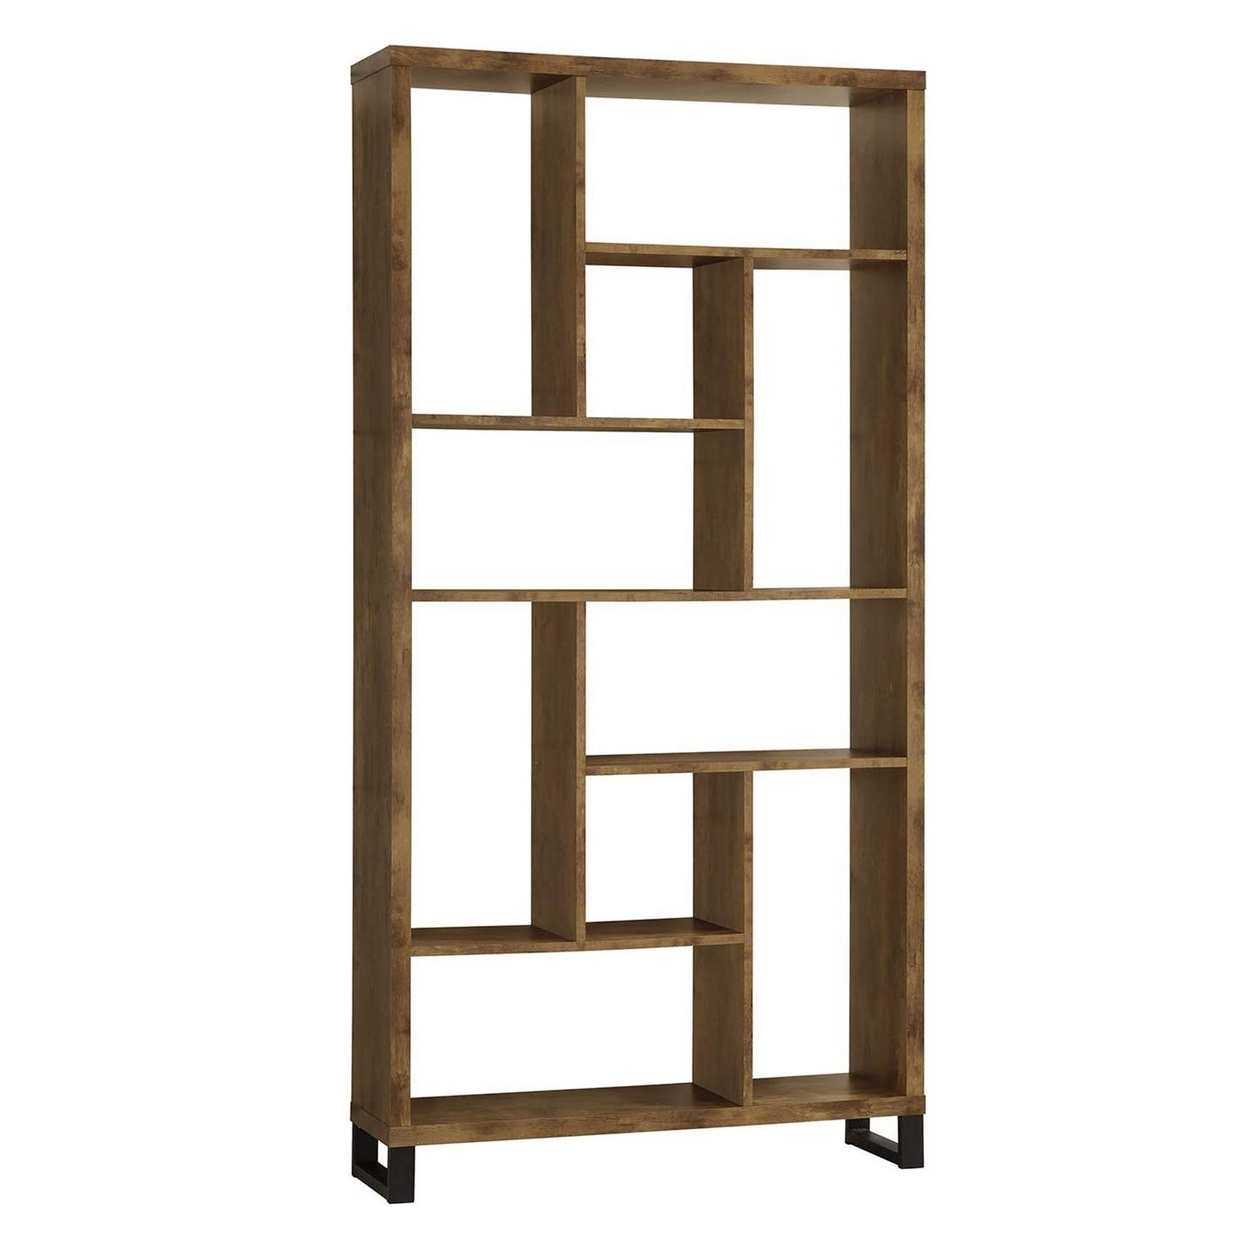 Metal And Wood Modern Style Bookcase With Multiple Shelves, Brown- Saltoro Sherpi